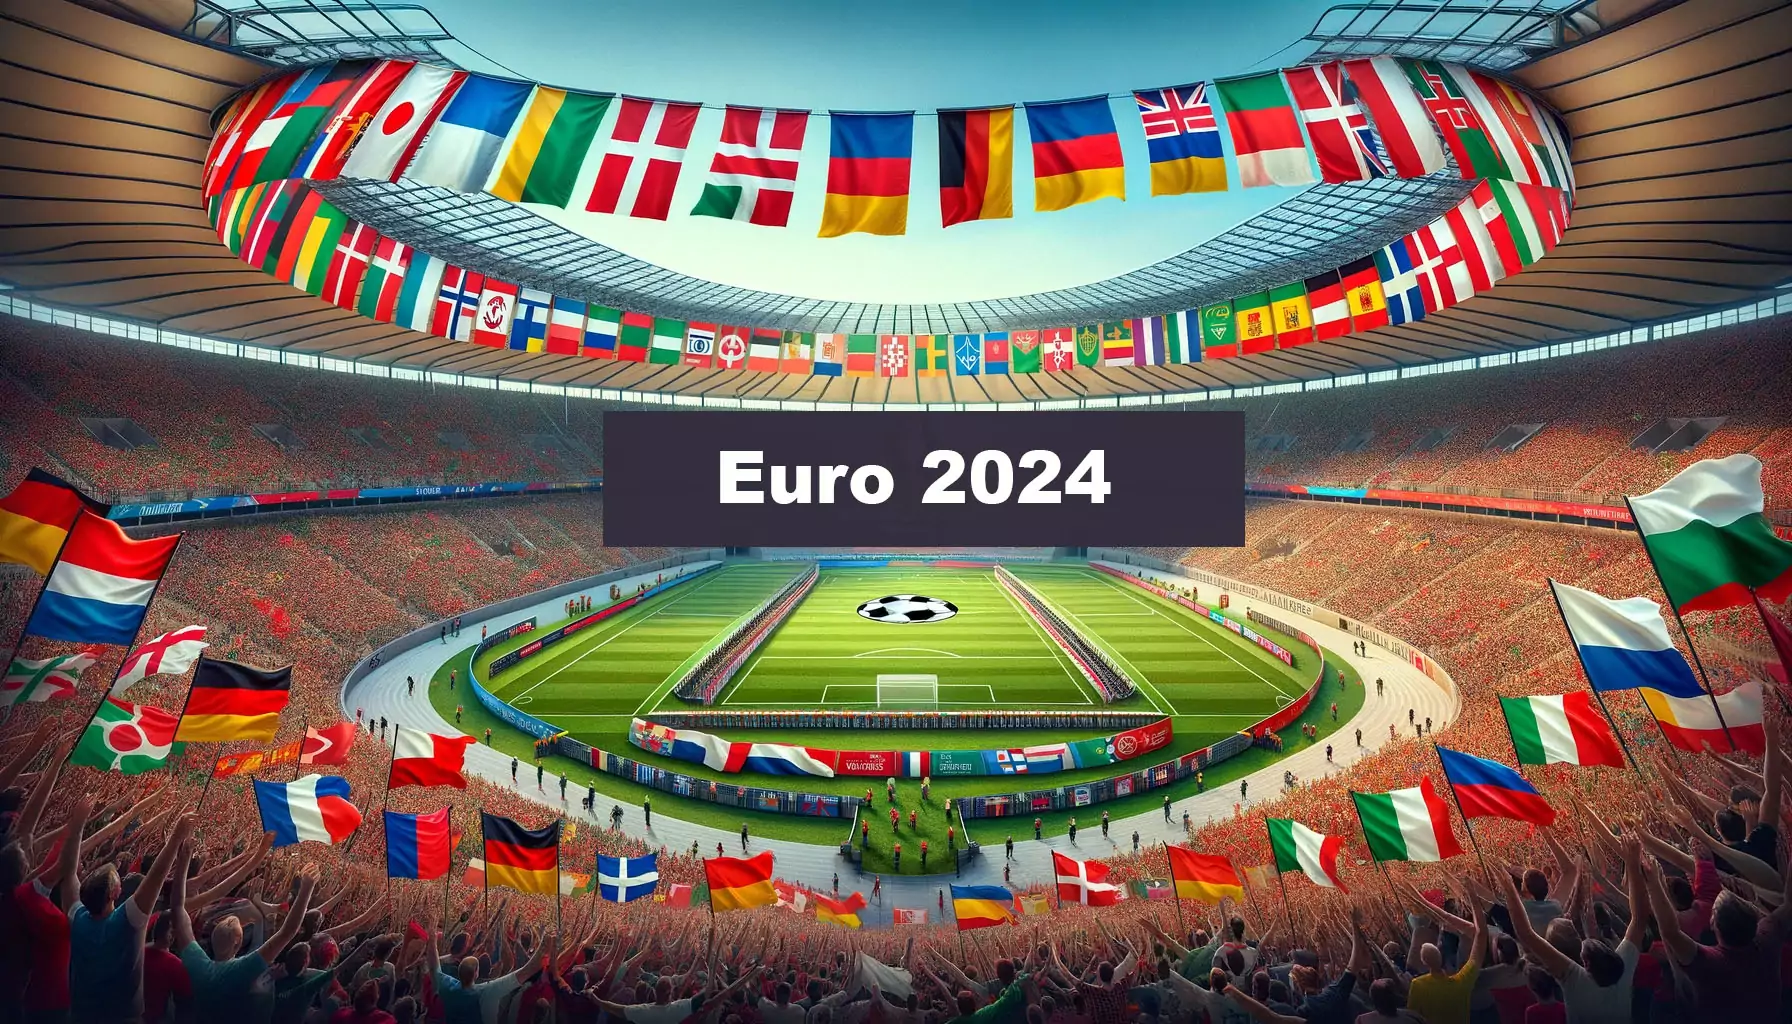 vibrant image of the Olympiastadion Berlin, all decked out with the flags for the Euro 2024 international teams